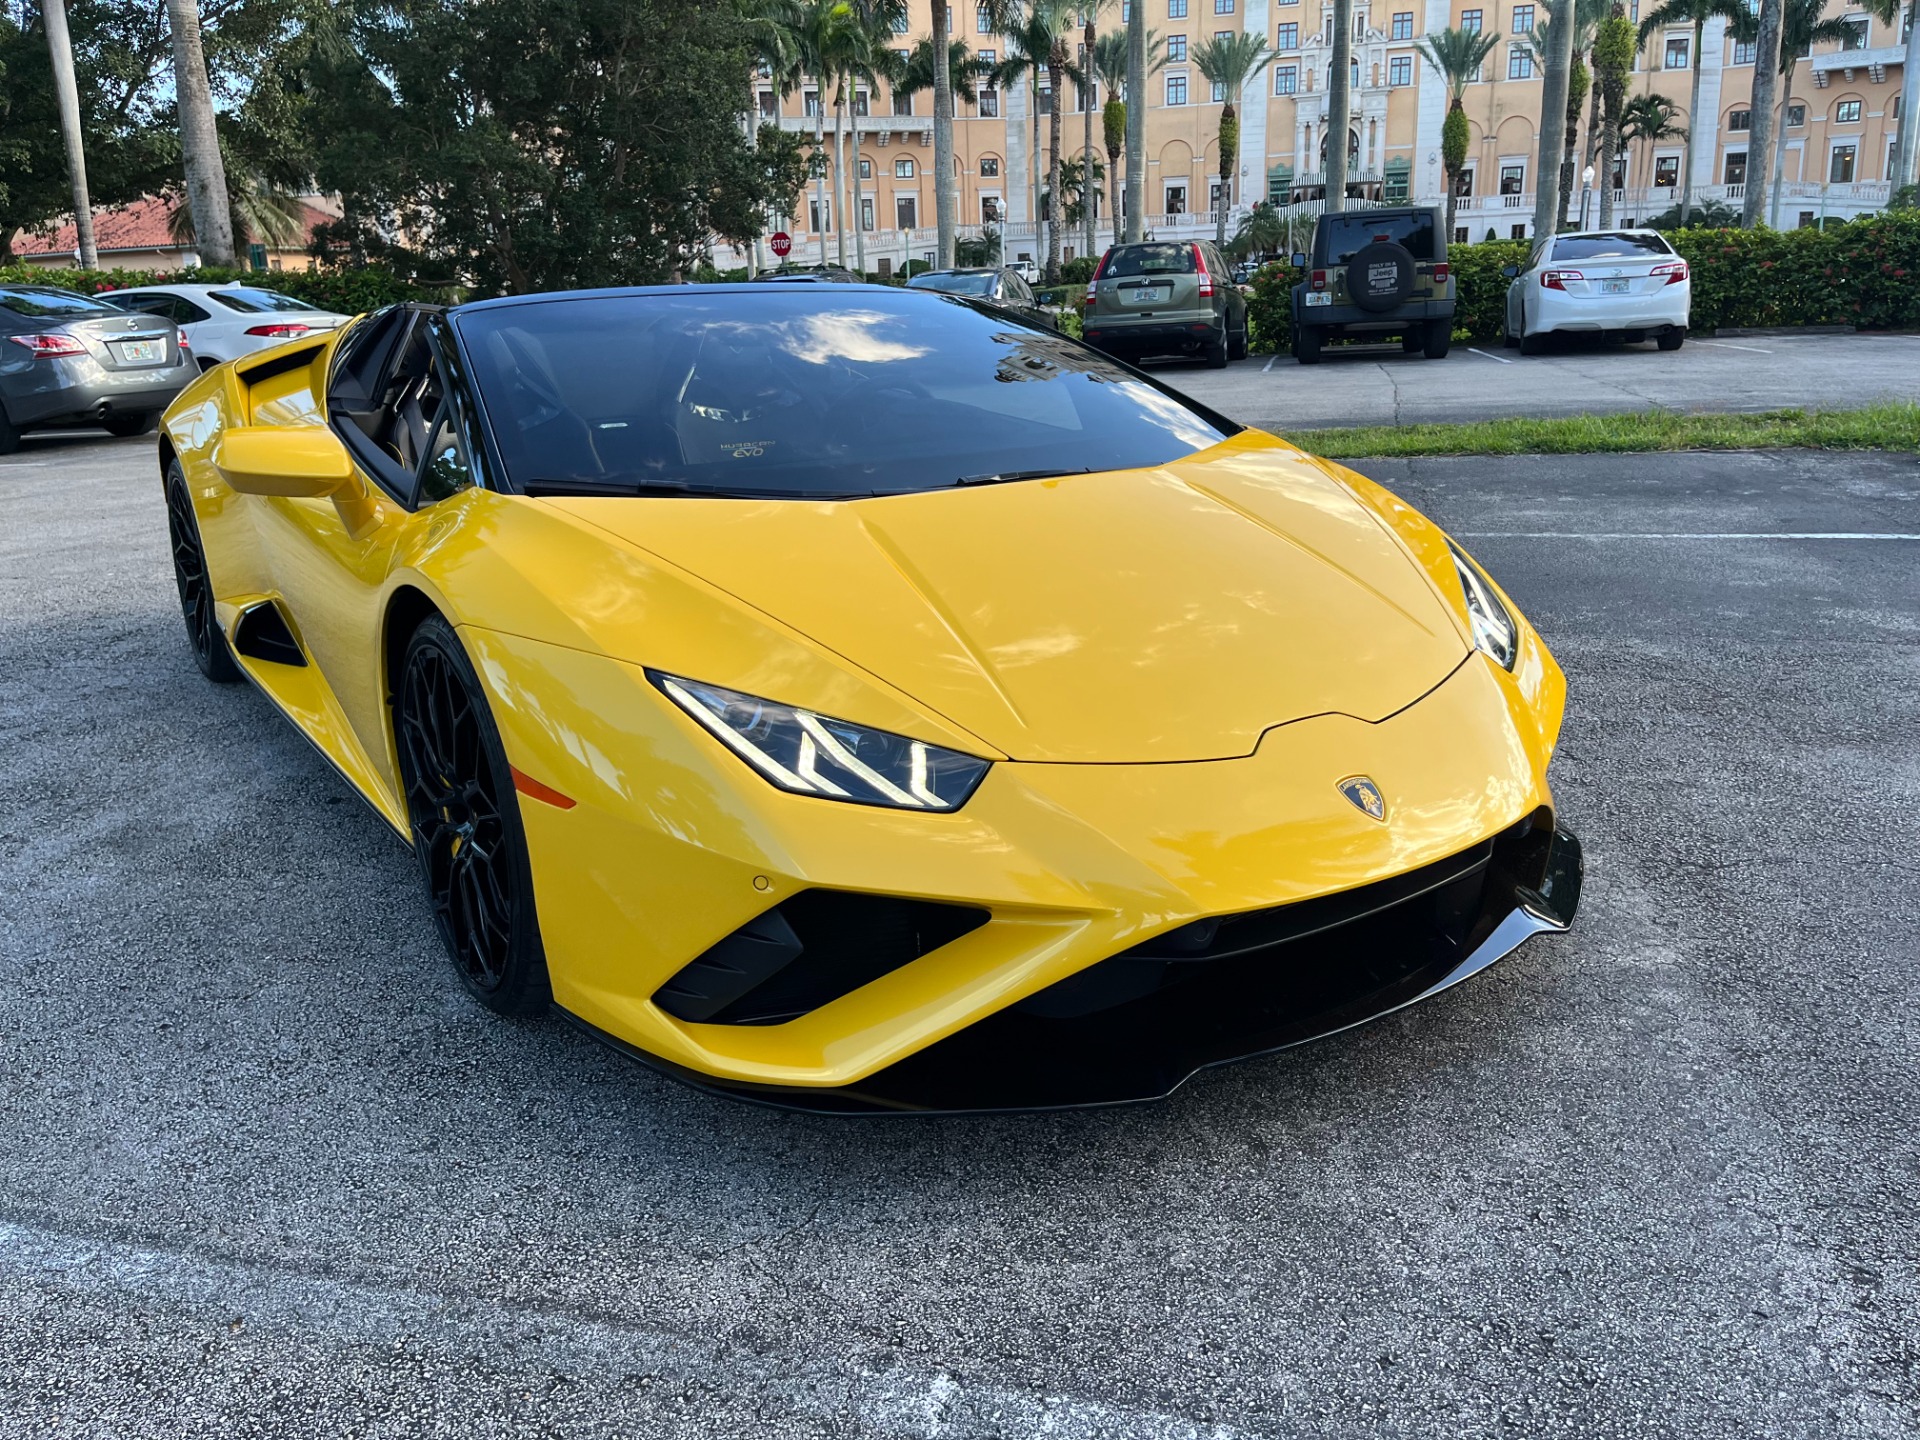 Used 2022 Lamborghini Huracan LP 610-4 EVO Spyder for sale Sold at The Gables Sports Cars in Miami FL 33146 2